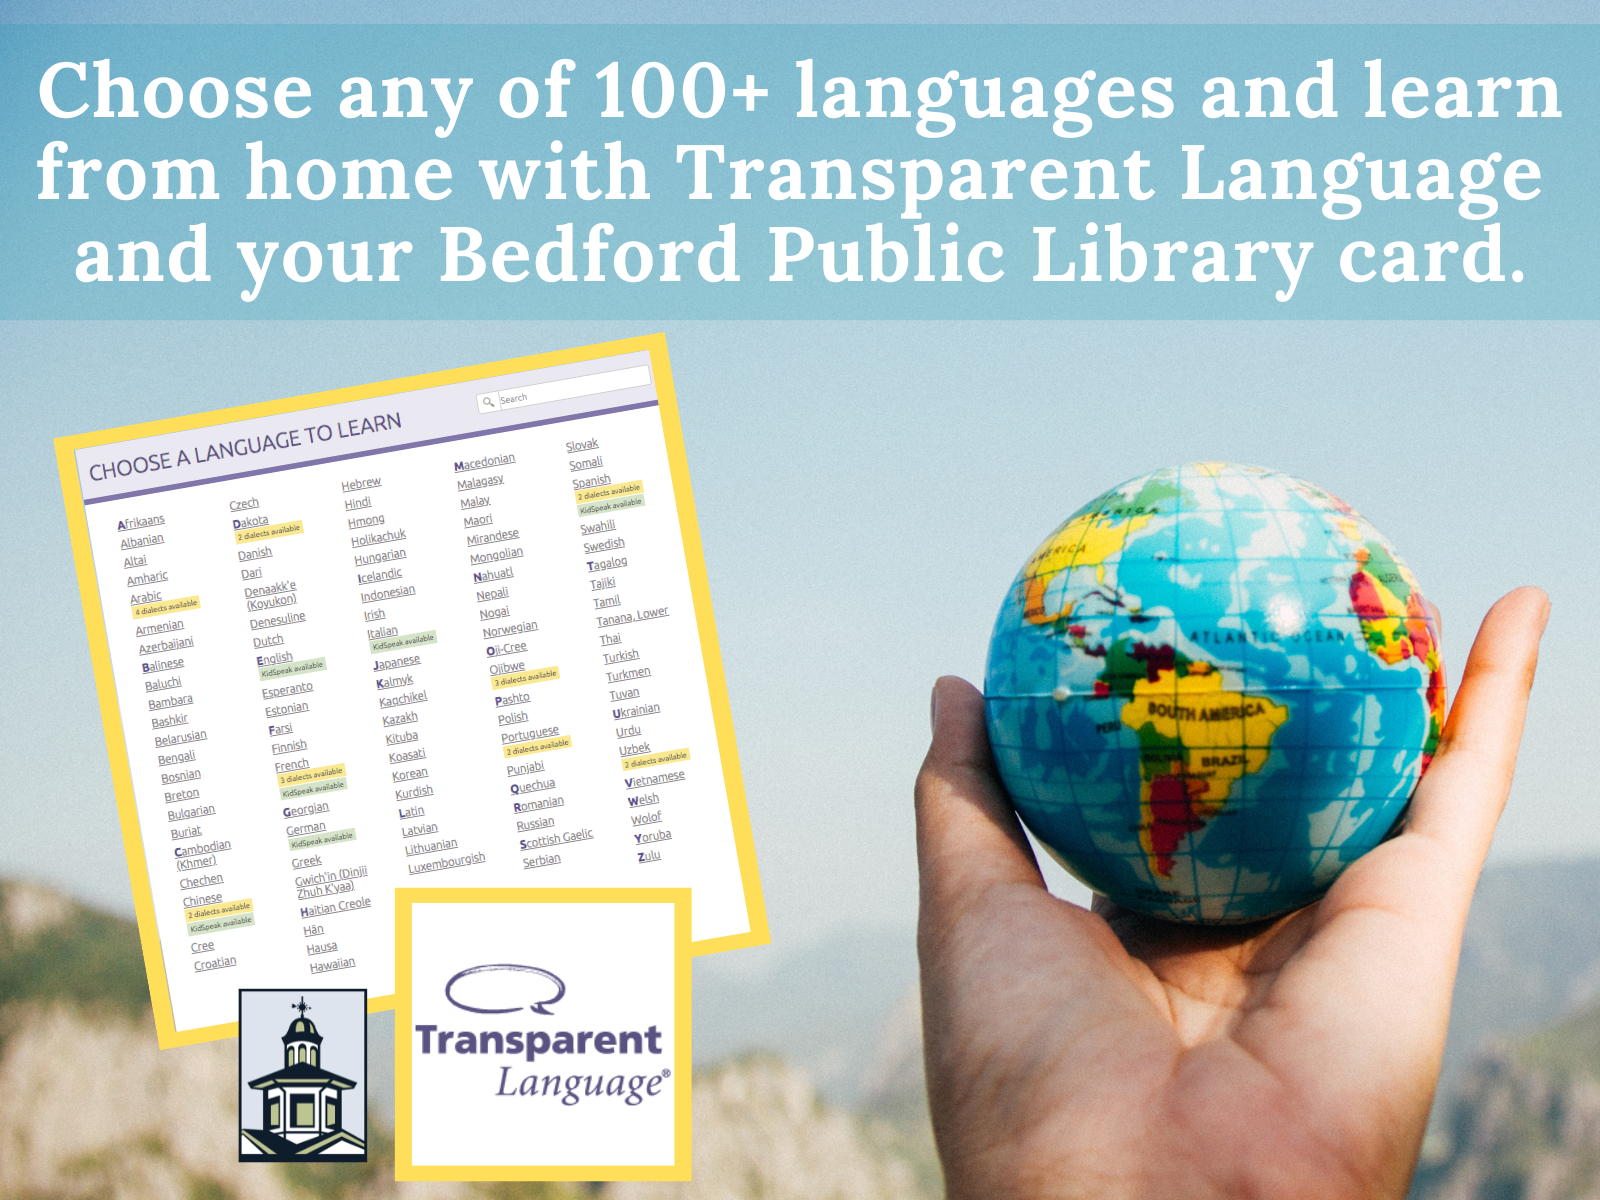 Transparent Language at the Bedford Public Library